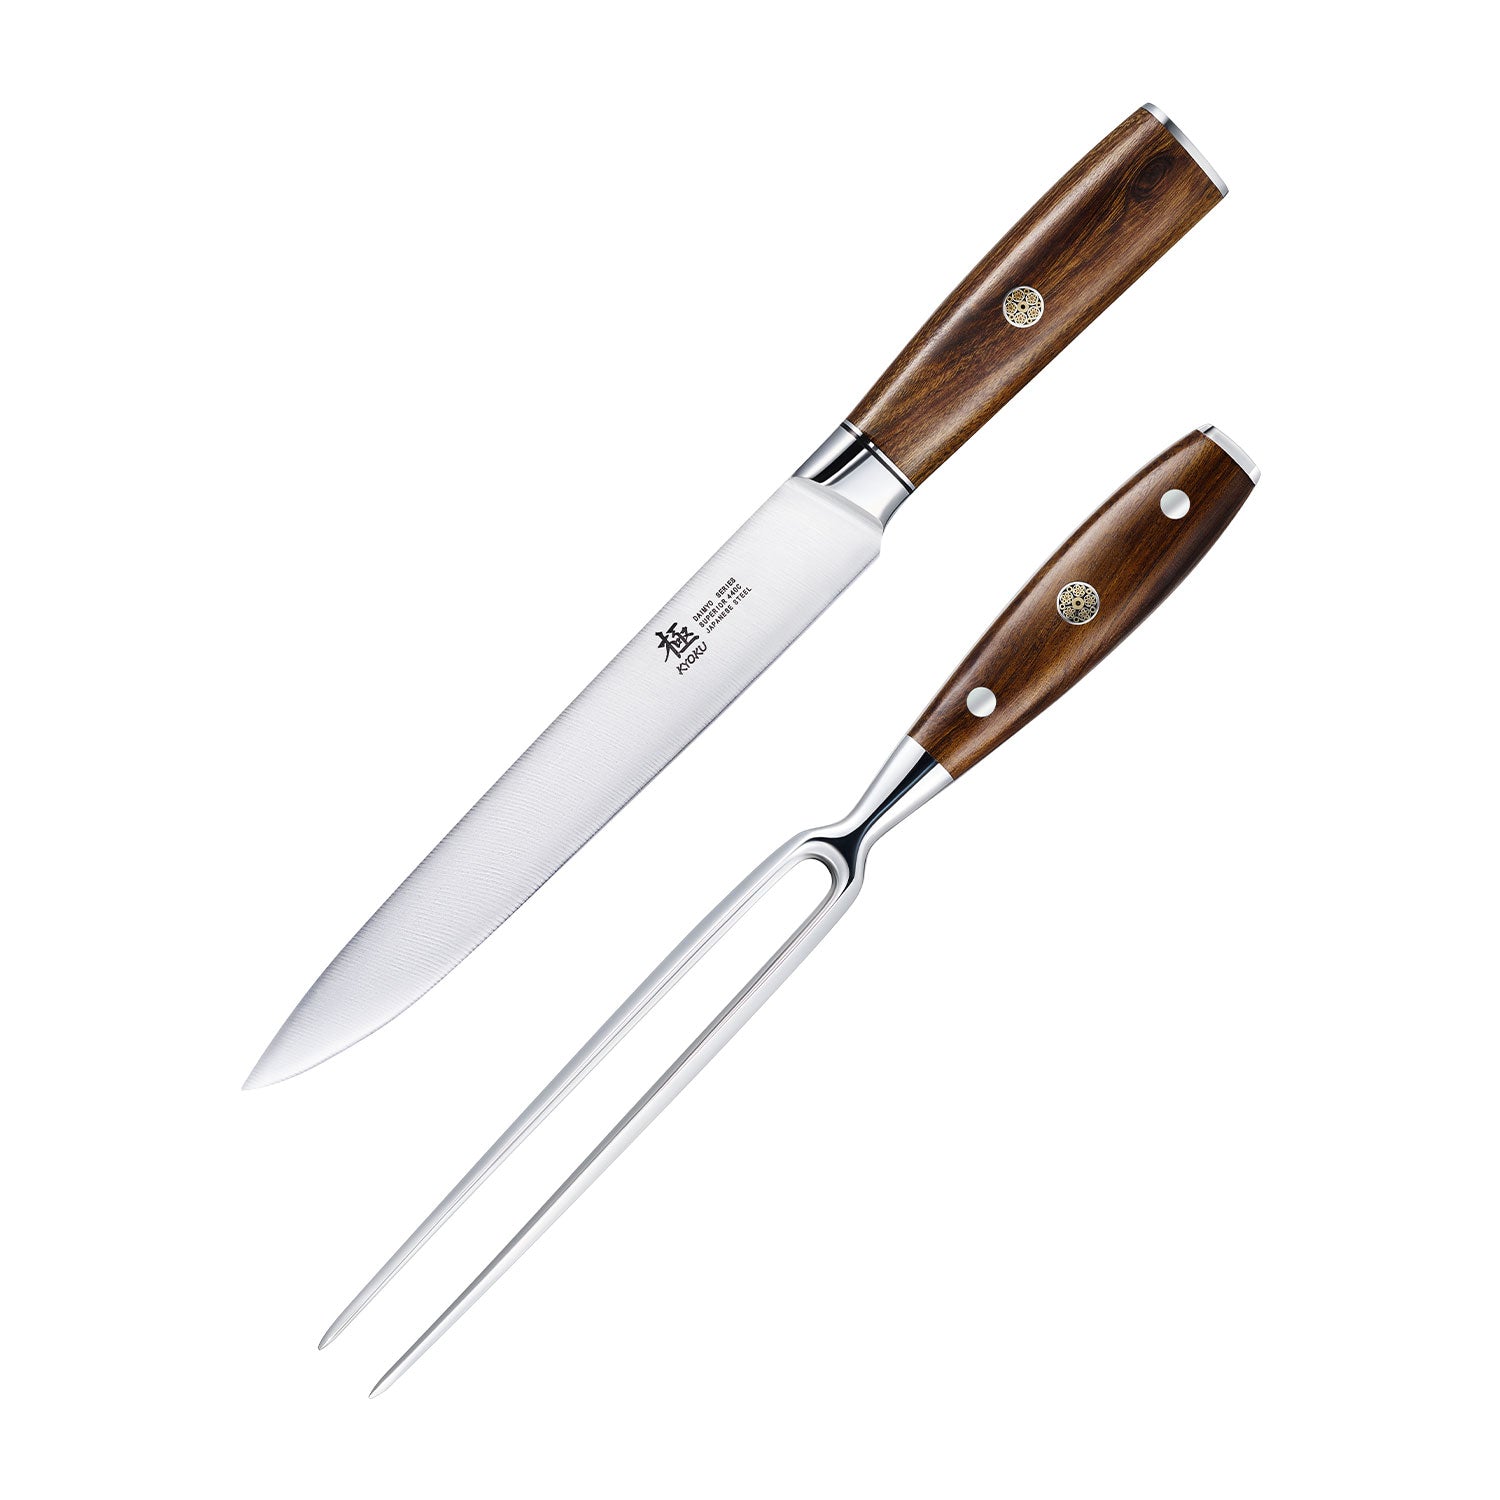 Kyoku Japanese Carving Knives with Fork | Serve Your Table Well